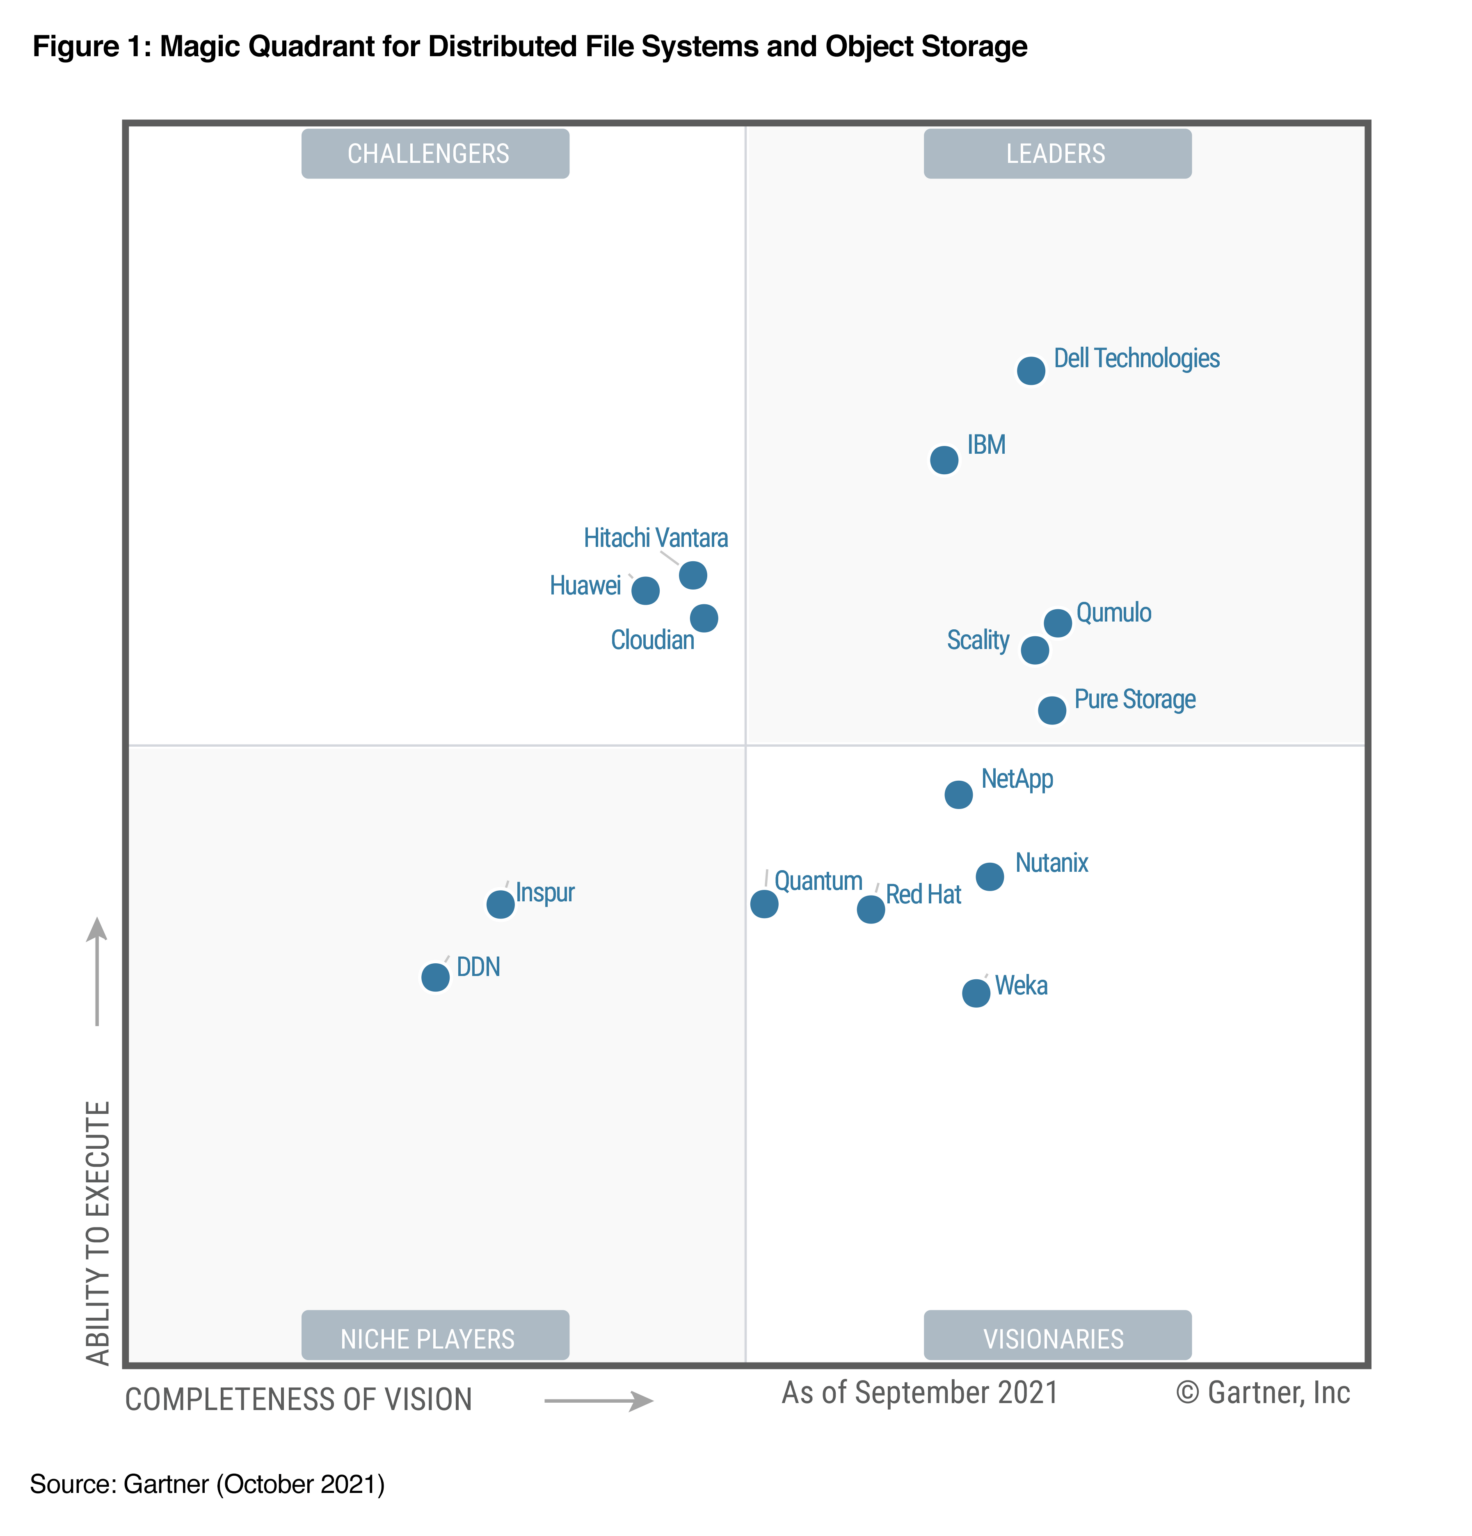 Leader Recognition in Distributed File Systems and Object Storage ...